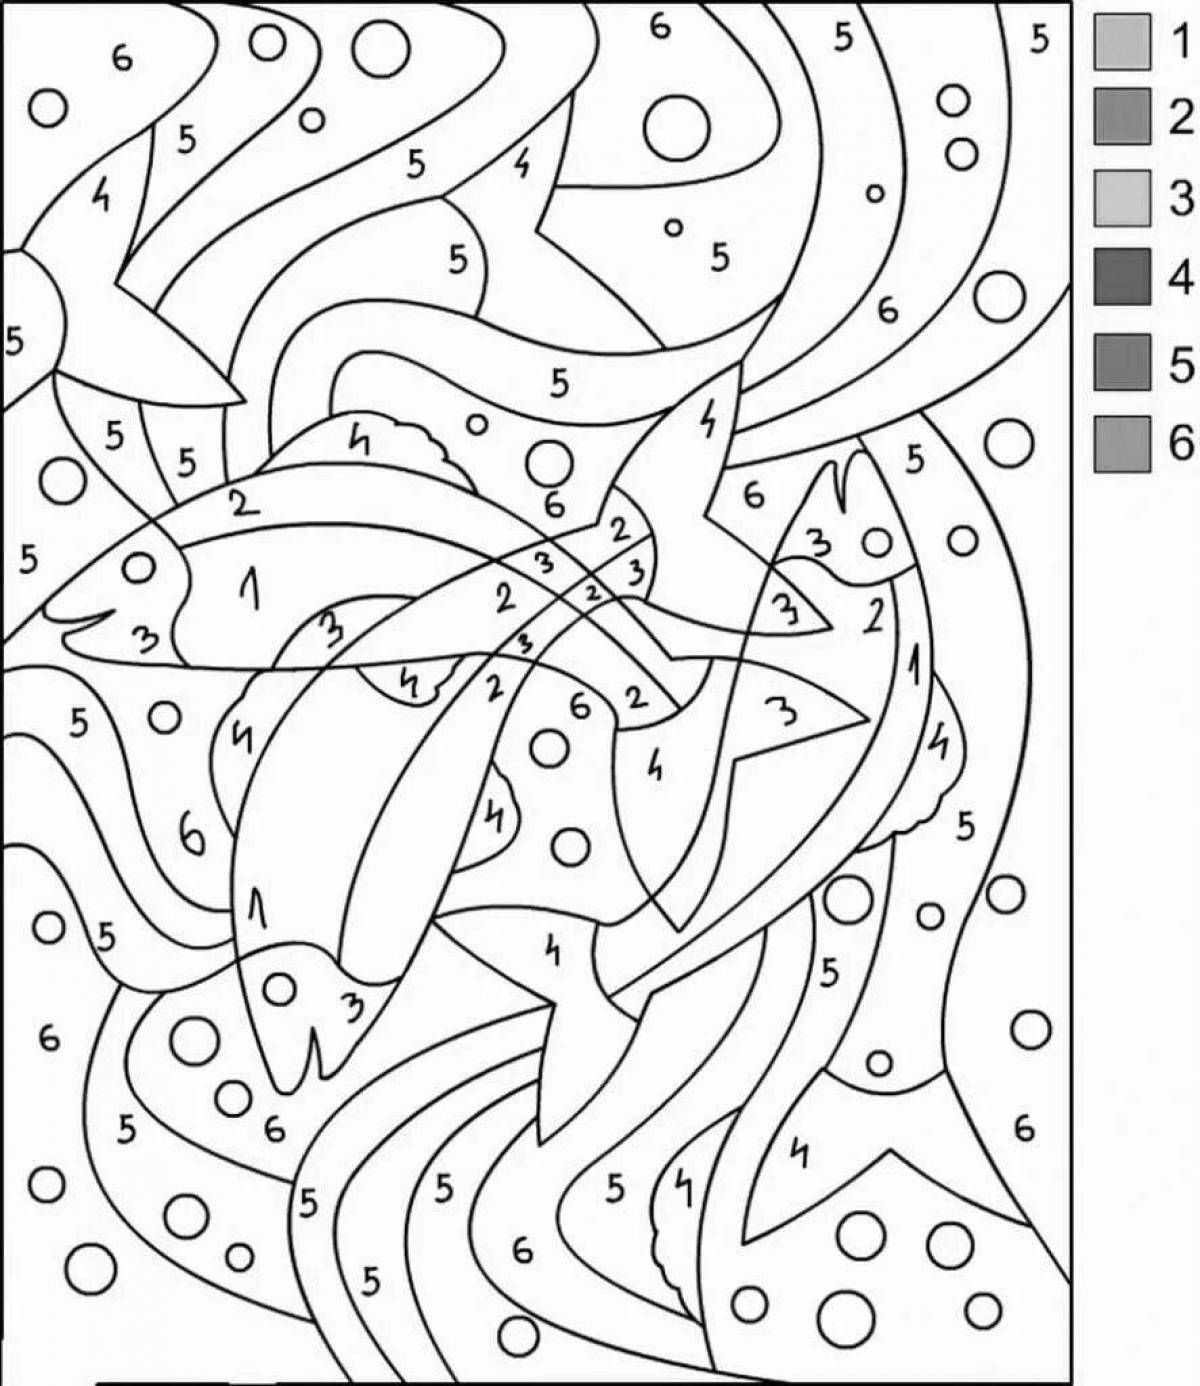 Color sparkling print by number coloring book for kids